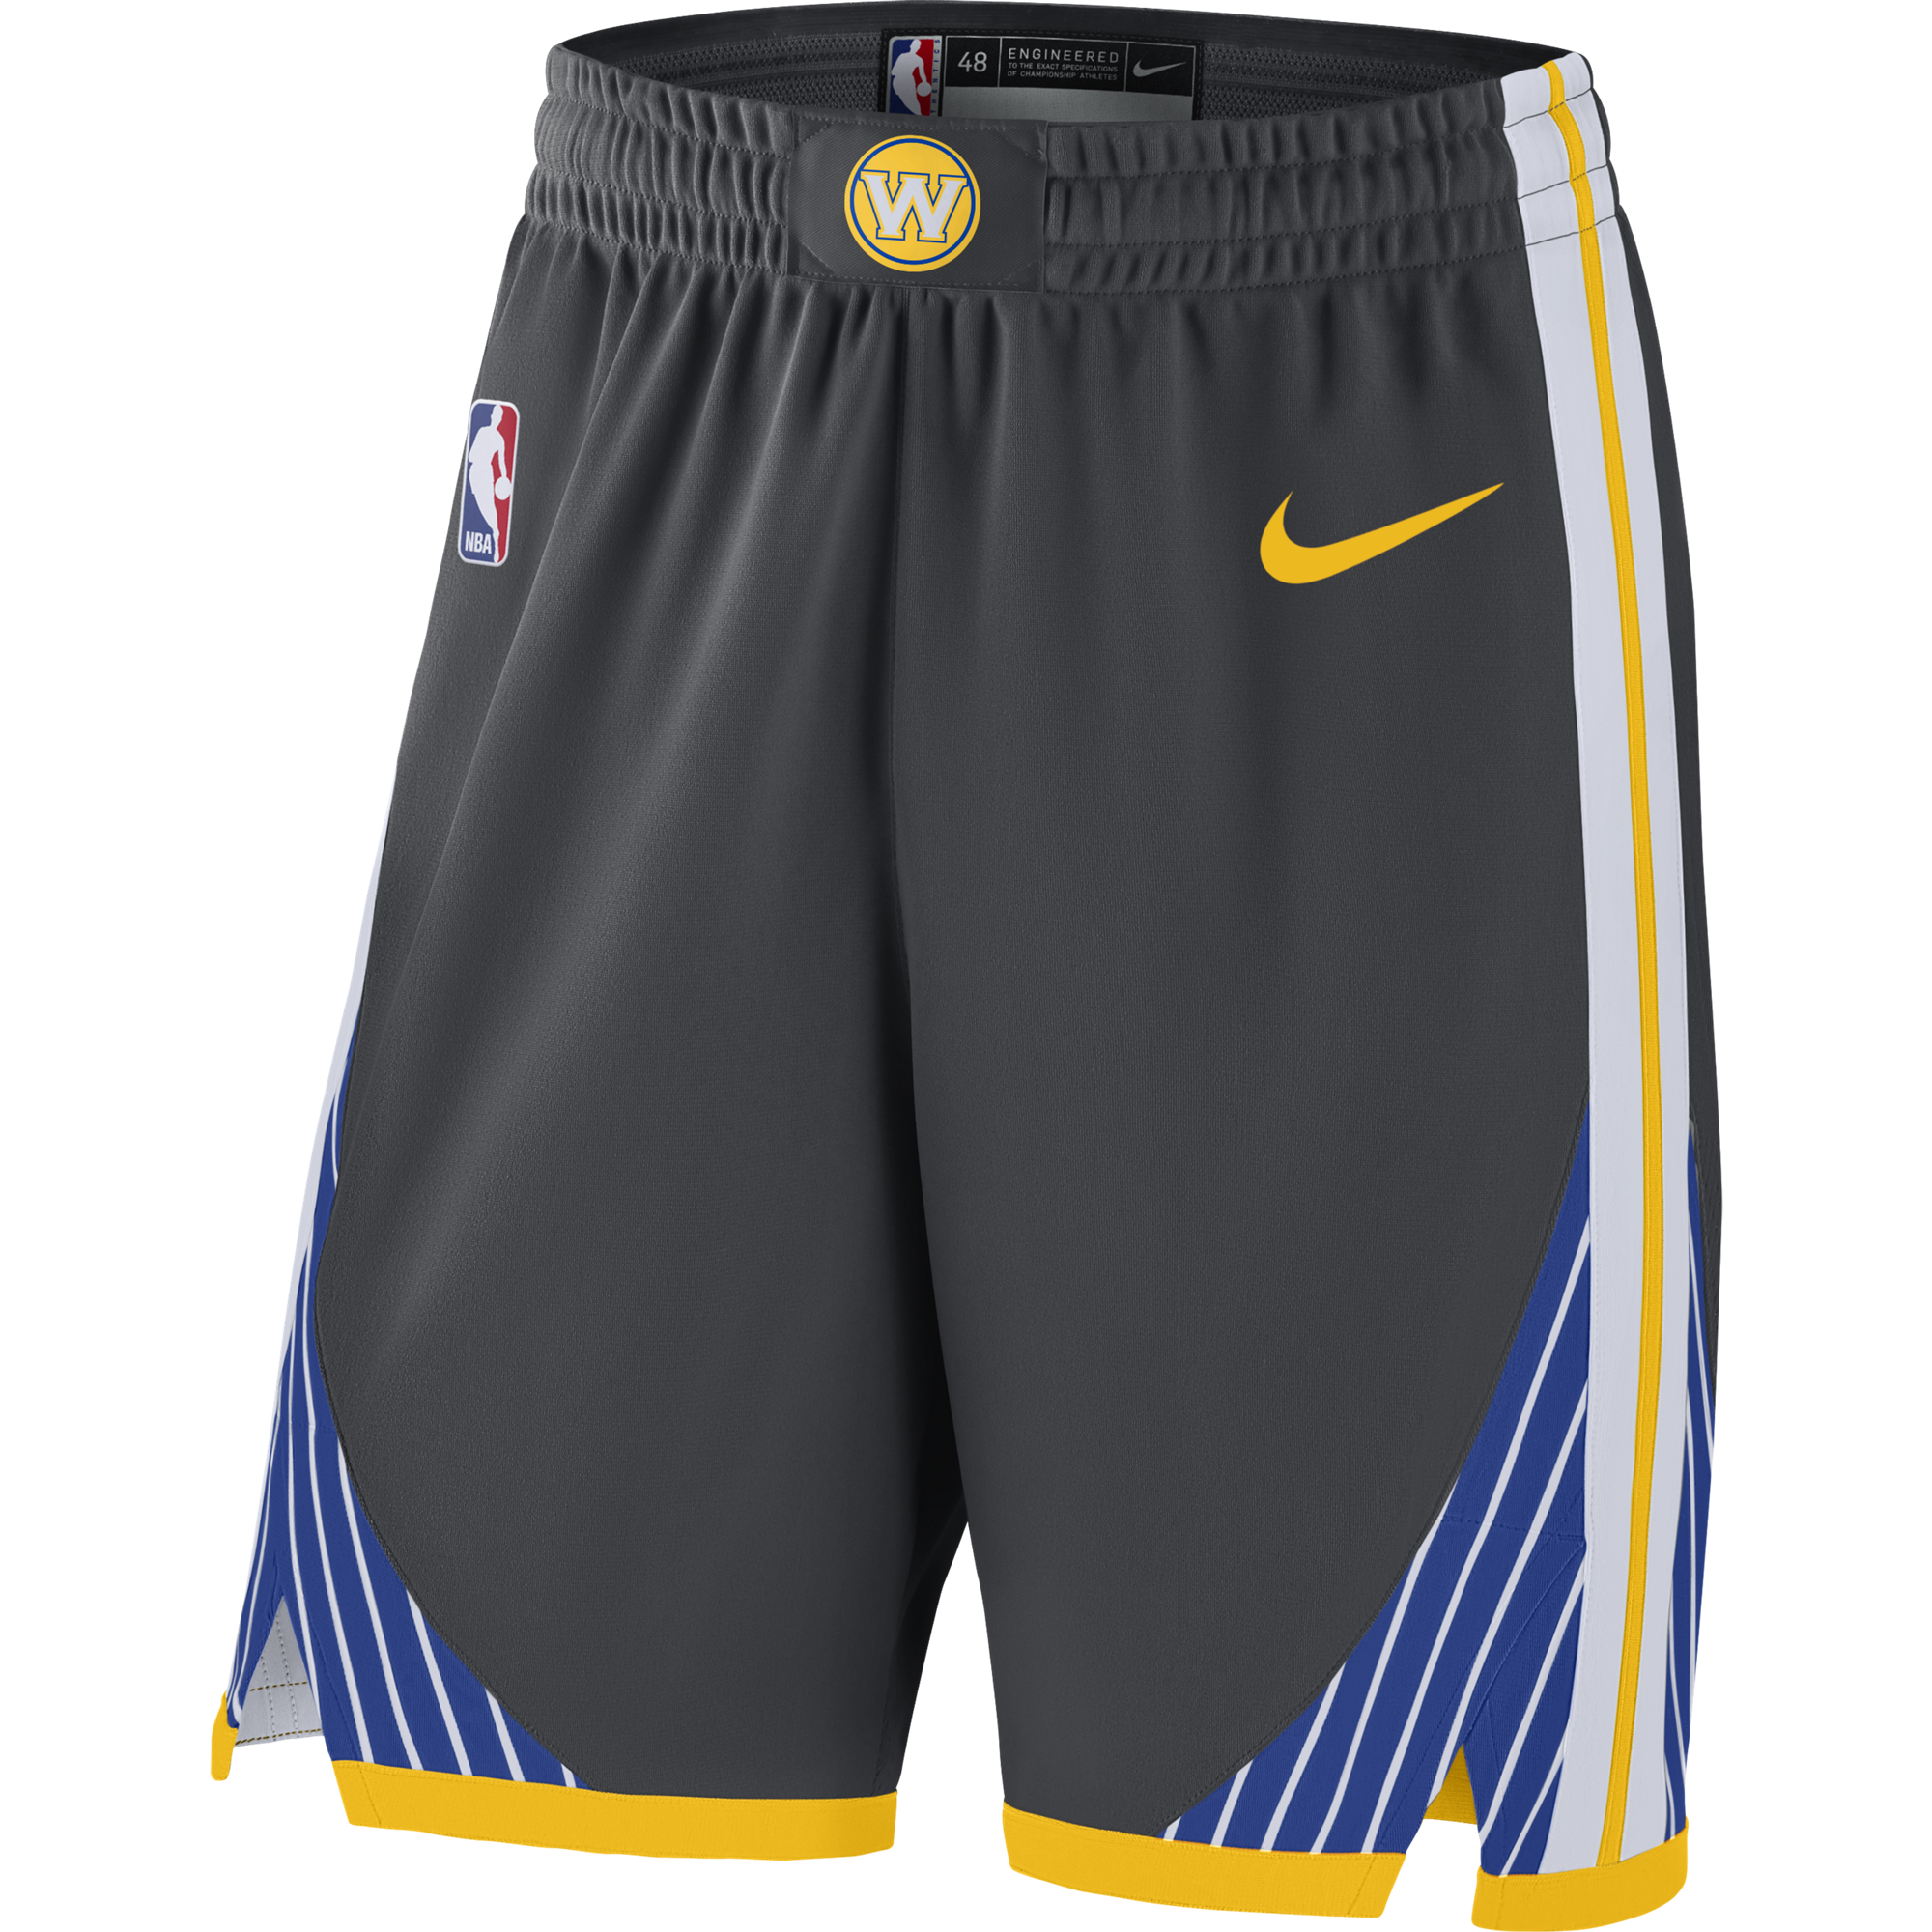 Youth Golden State Warriors New Blue Replica Basketball Shorts by Outer Stuff S/8 